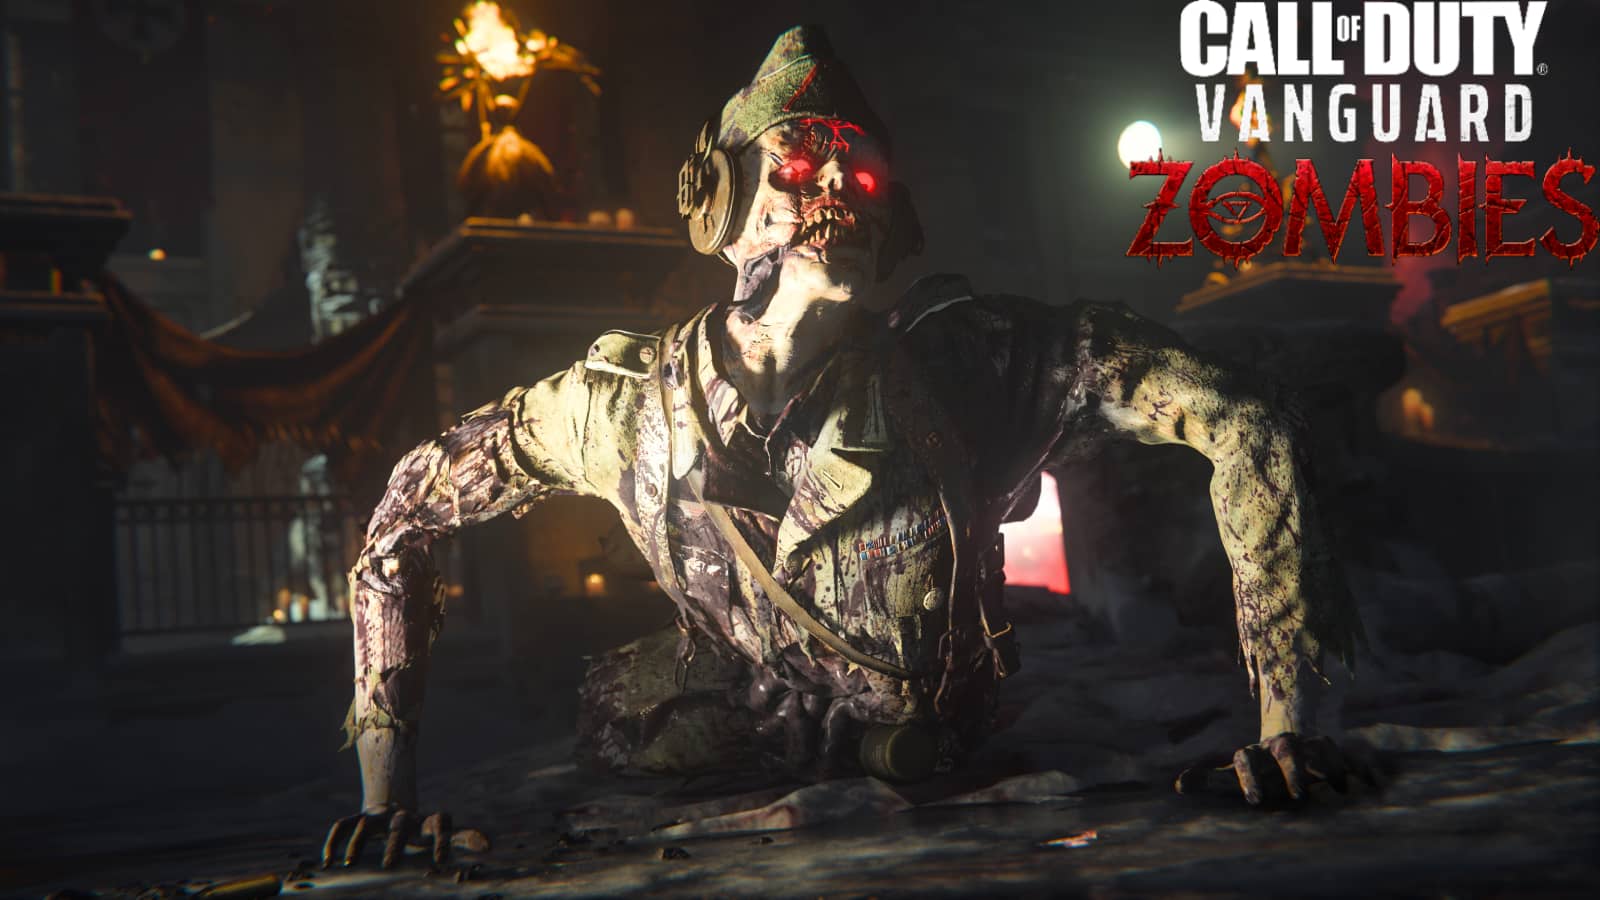 A zombie climbing out of a hole in Vanguard's Zombies mode